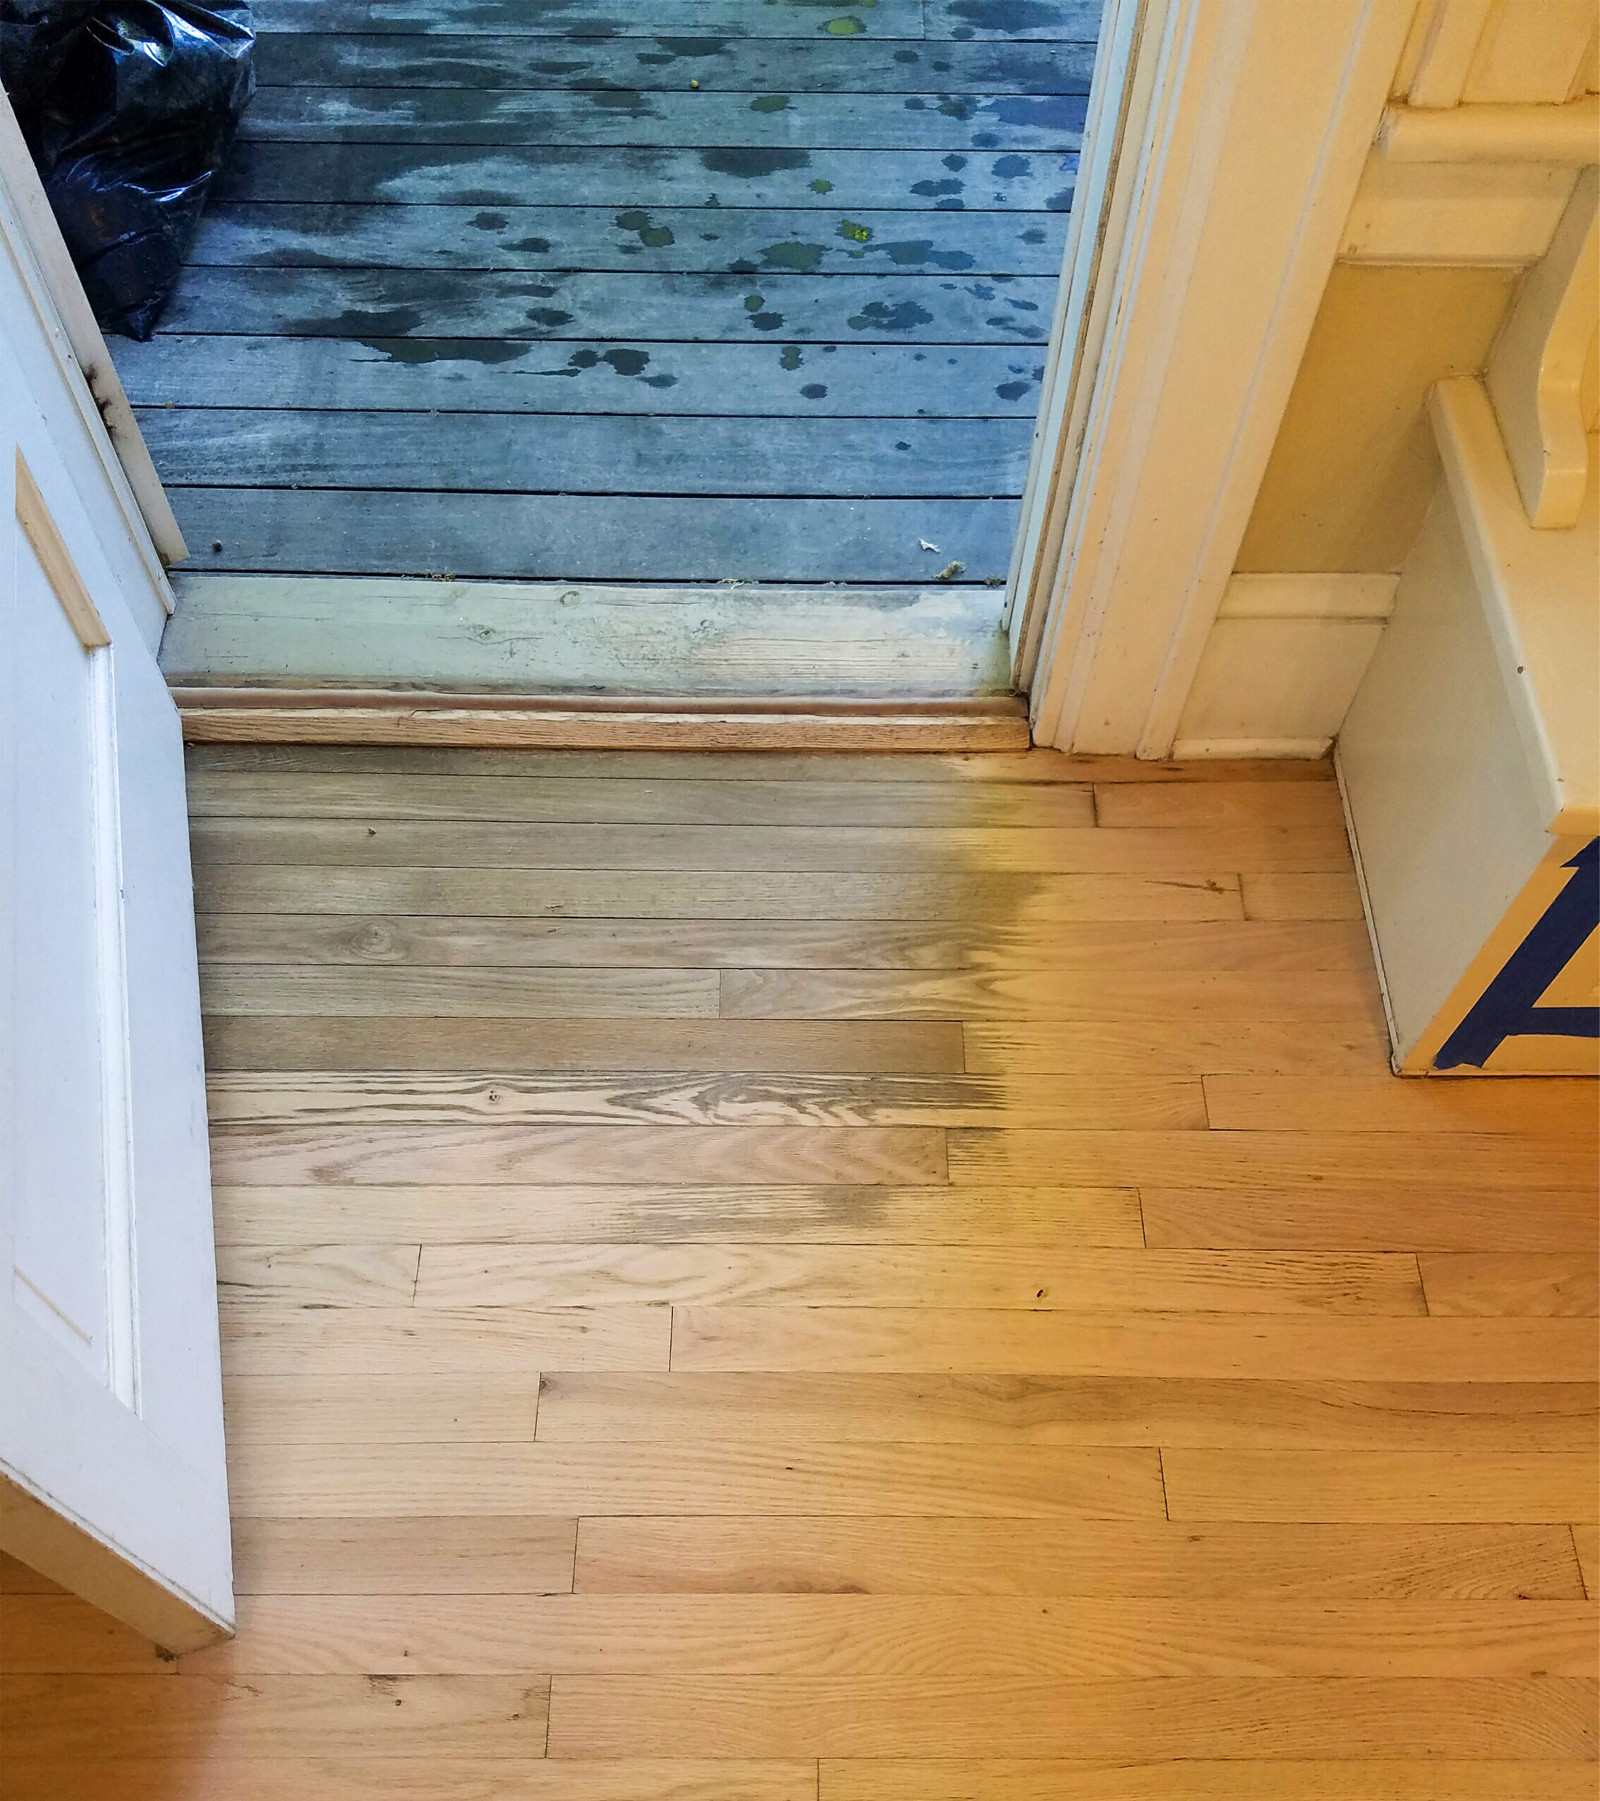 Water Damaged Wood Floors From Refrigerator Water Line Leak - The